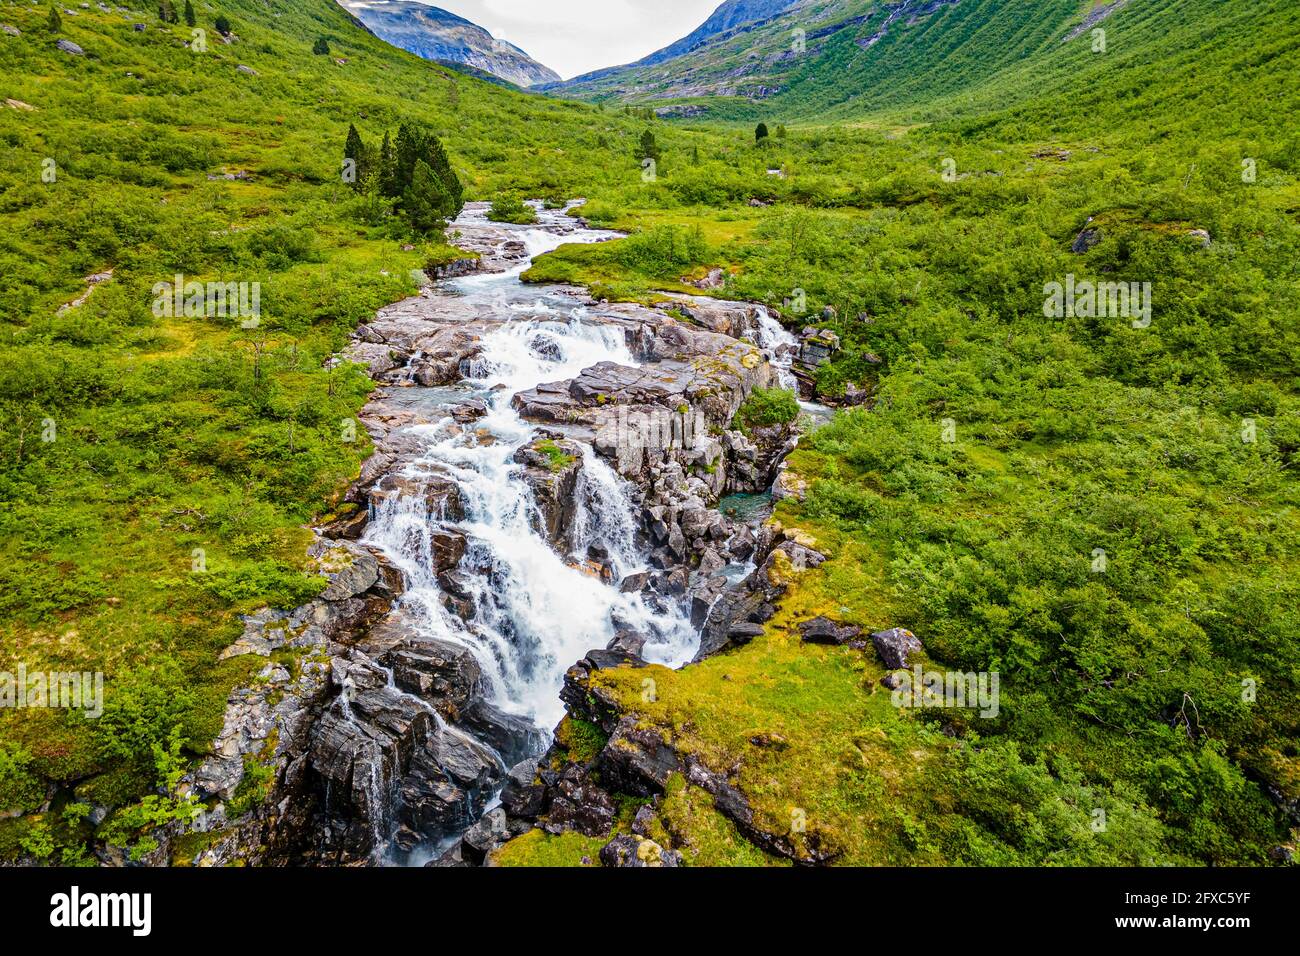 Waterfall flowing through rocks at green mountain valley Stock Photo